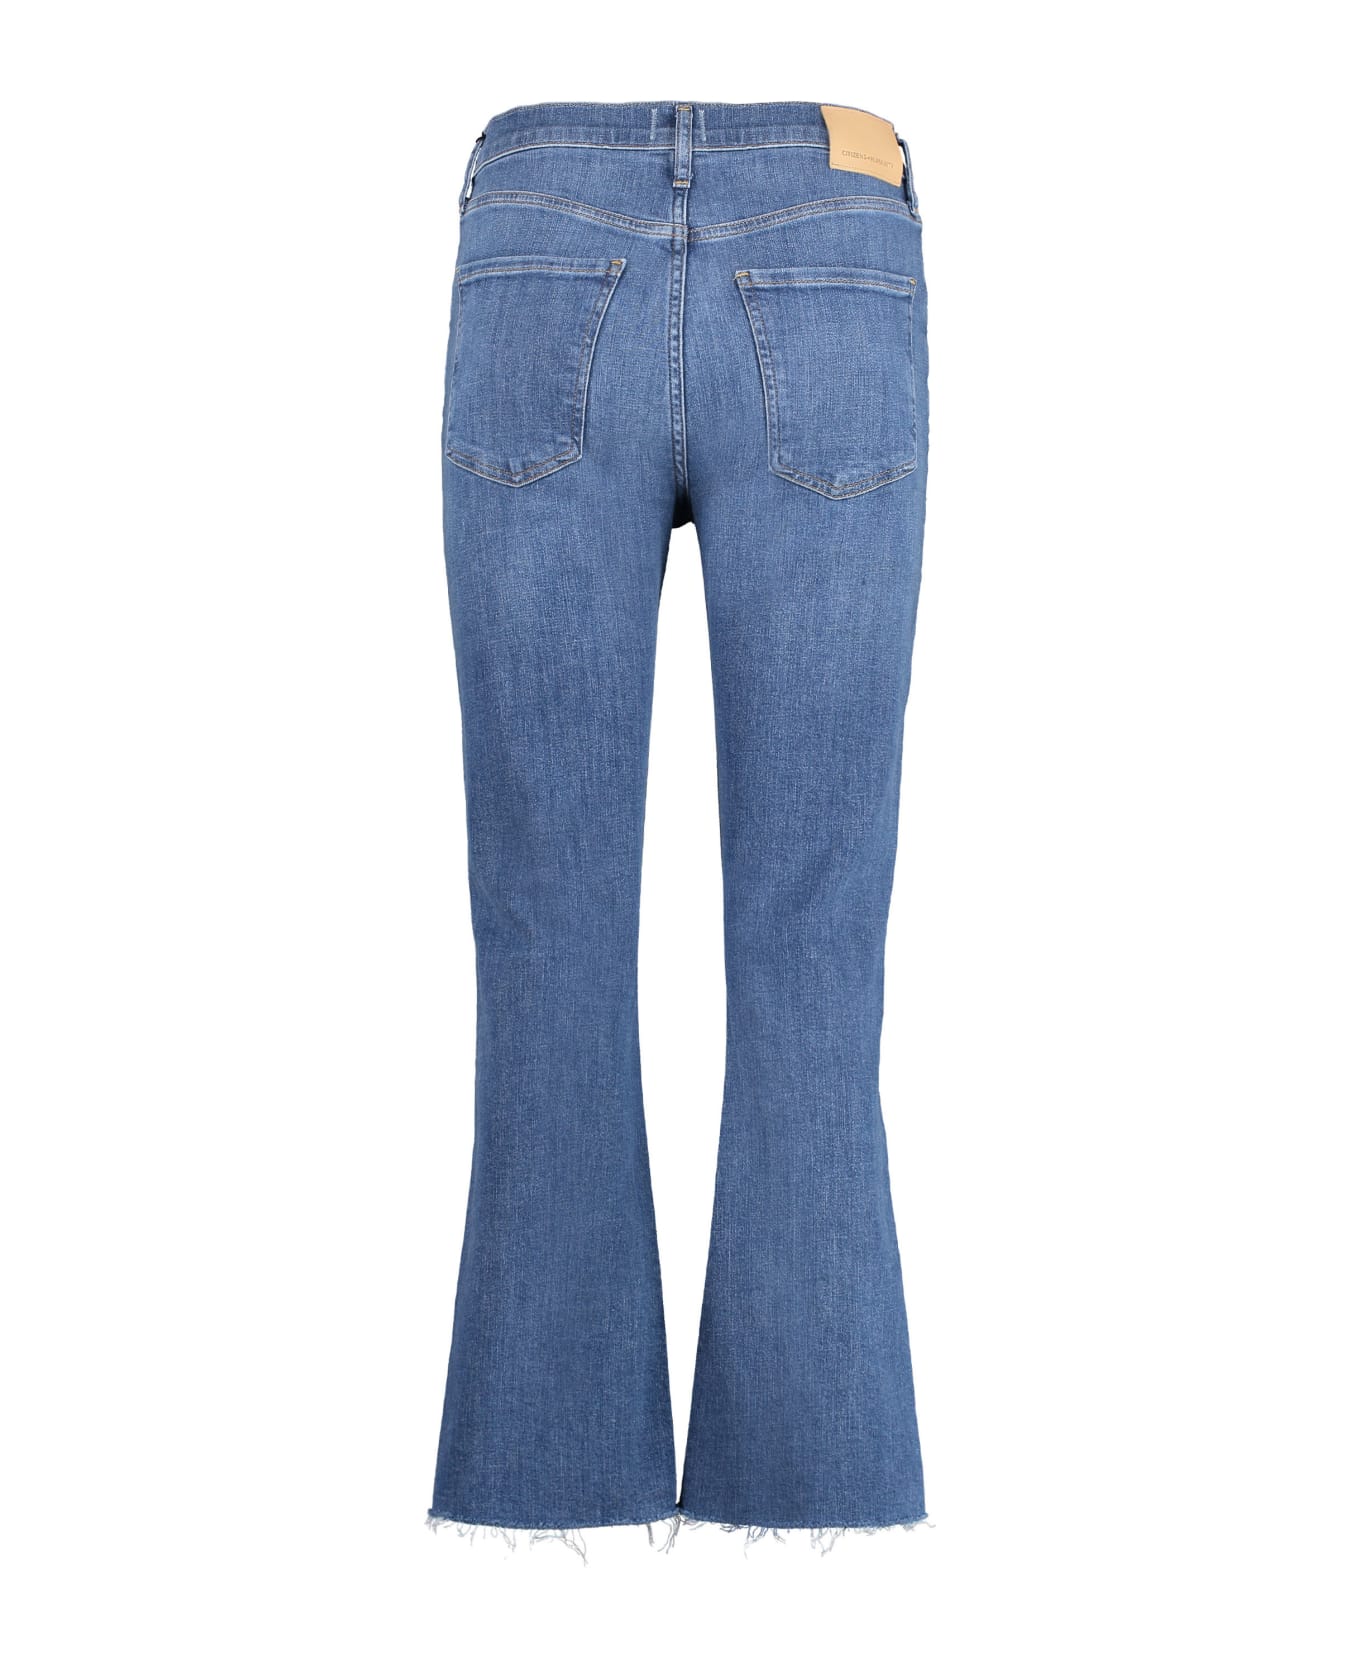 Citizens of Humanity Isola Cropped Jeans - Denim